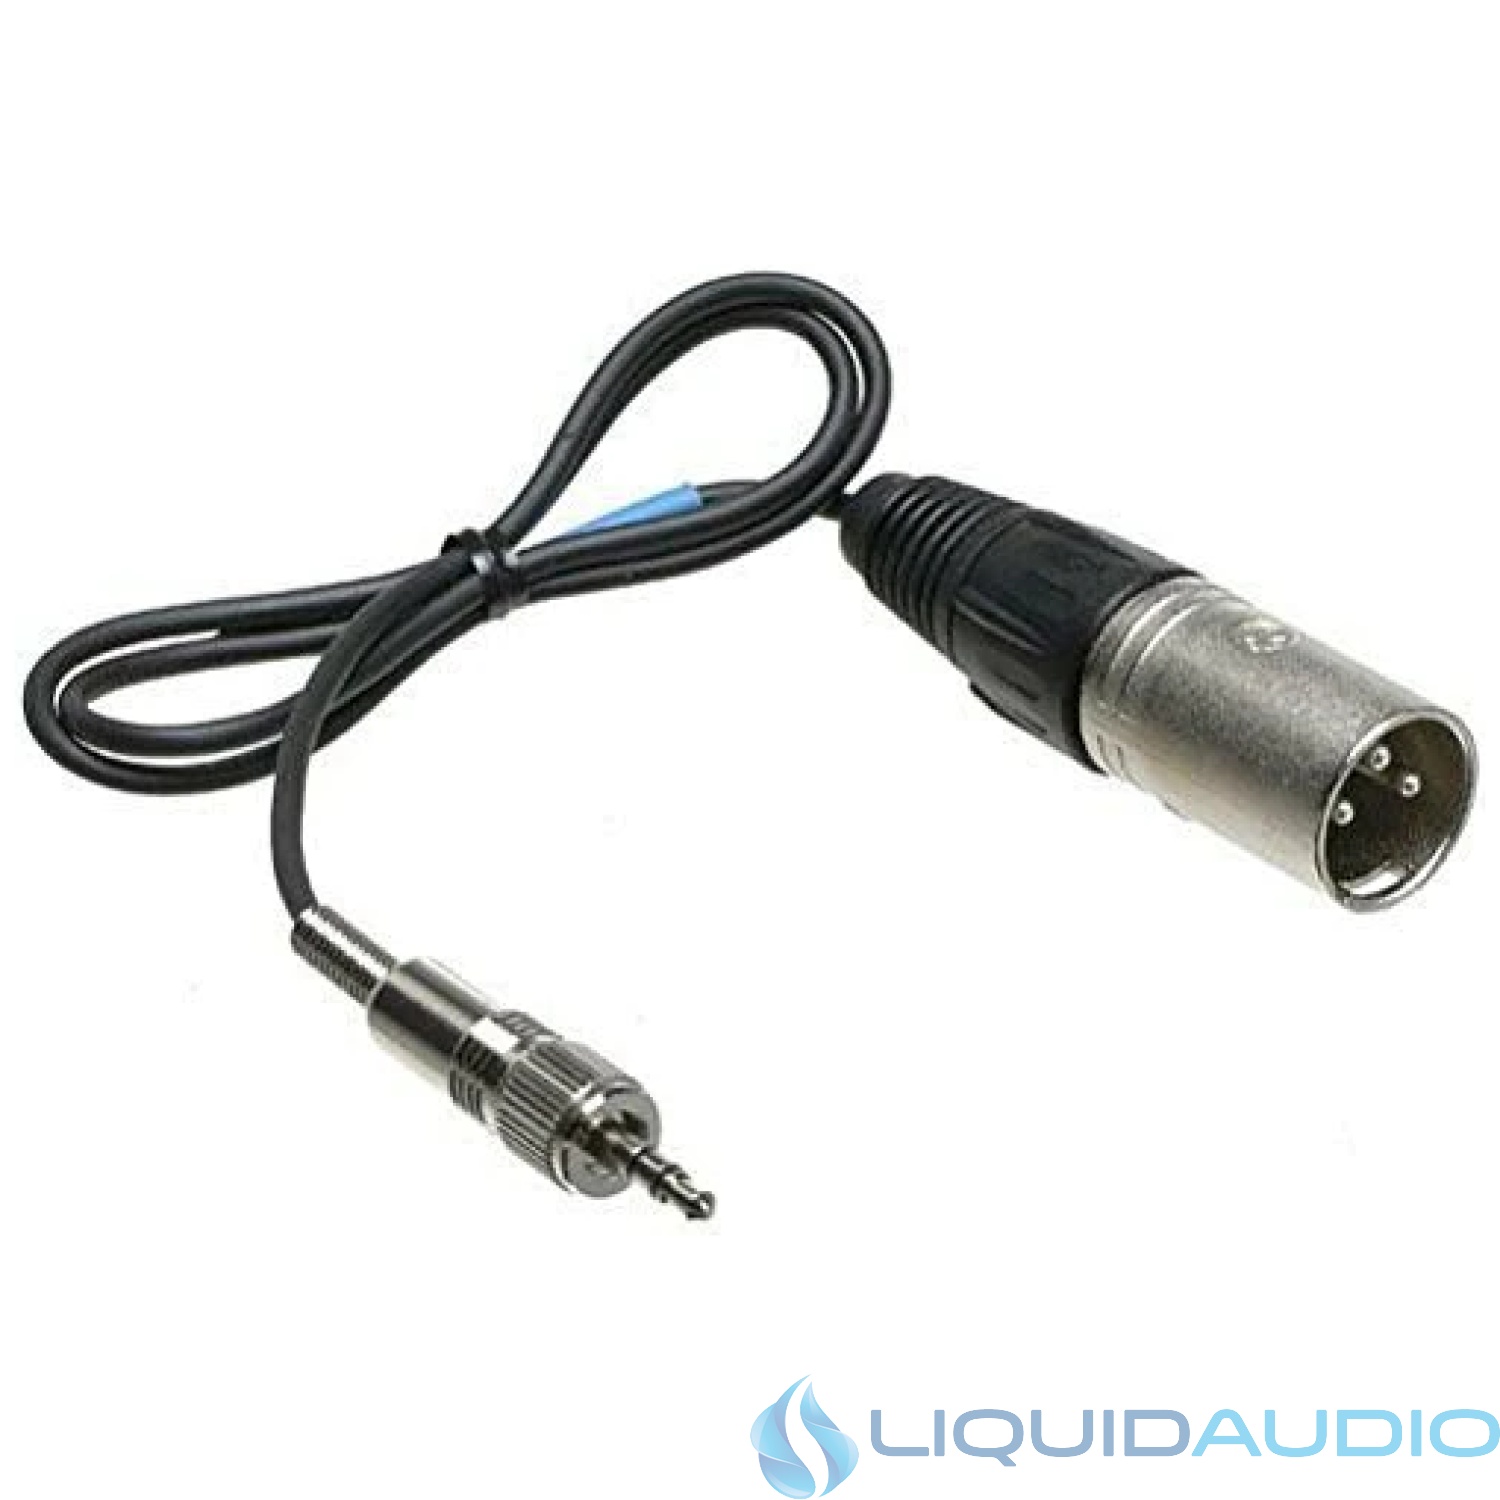 Sennheiser CL-100 1/8" Male Mini Jack to XLR-Male Connector Cable for EK100 Receiver